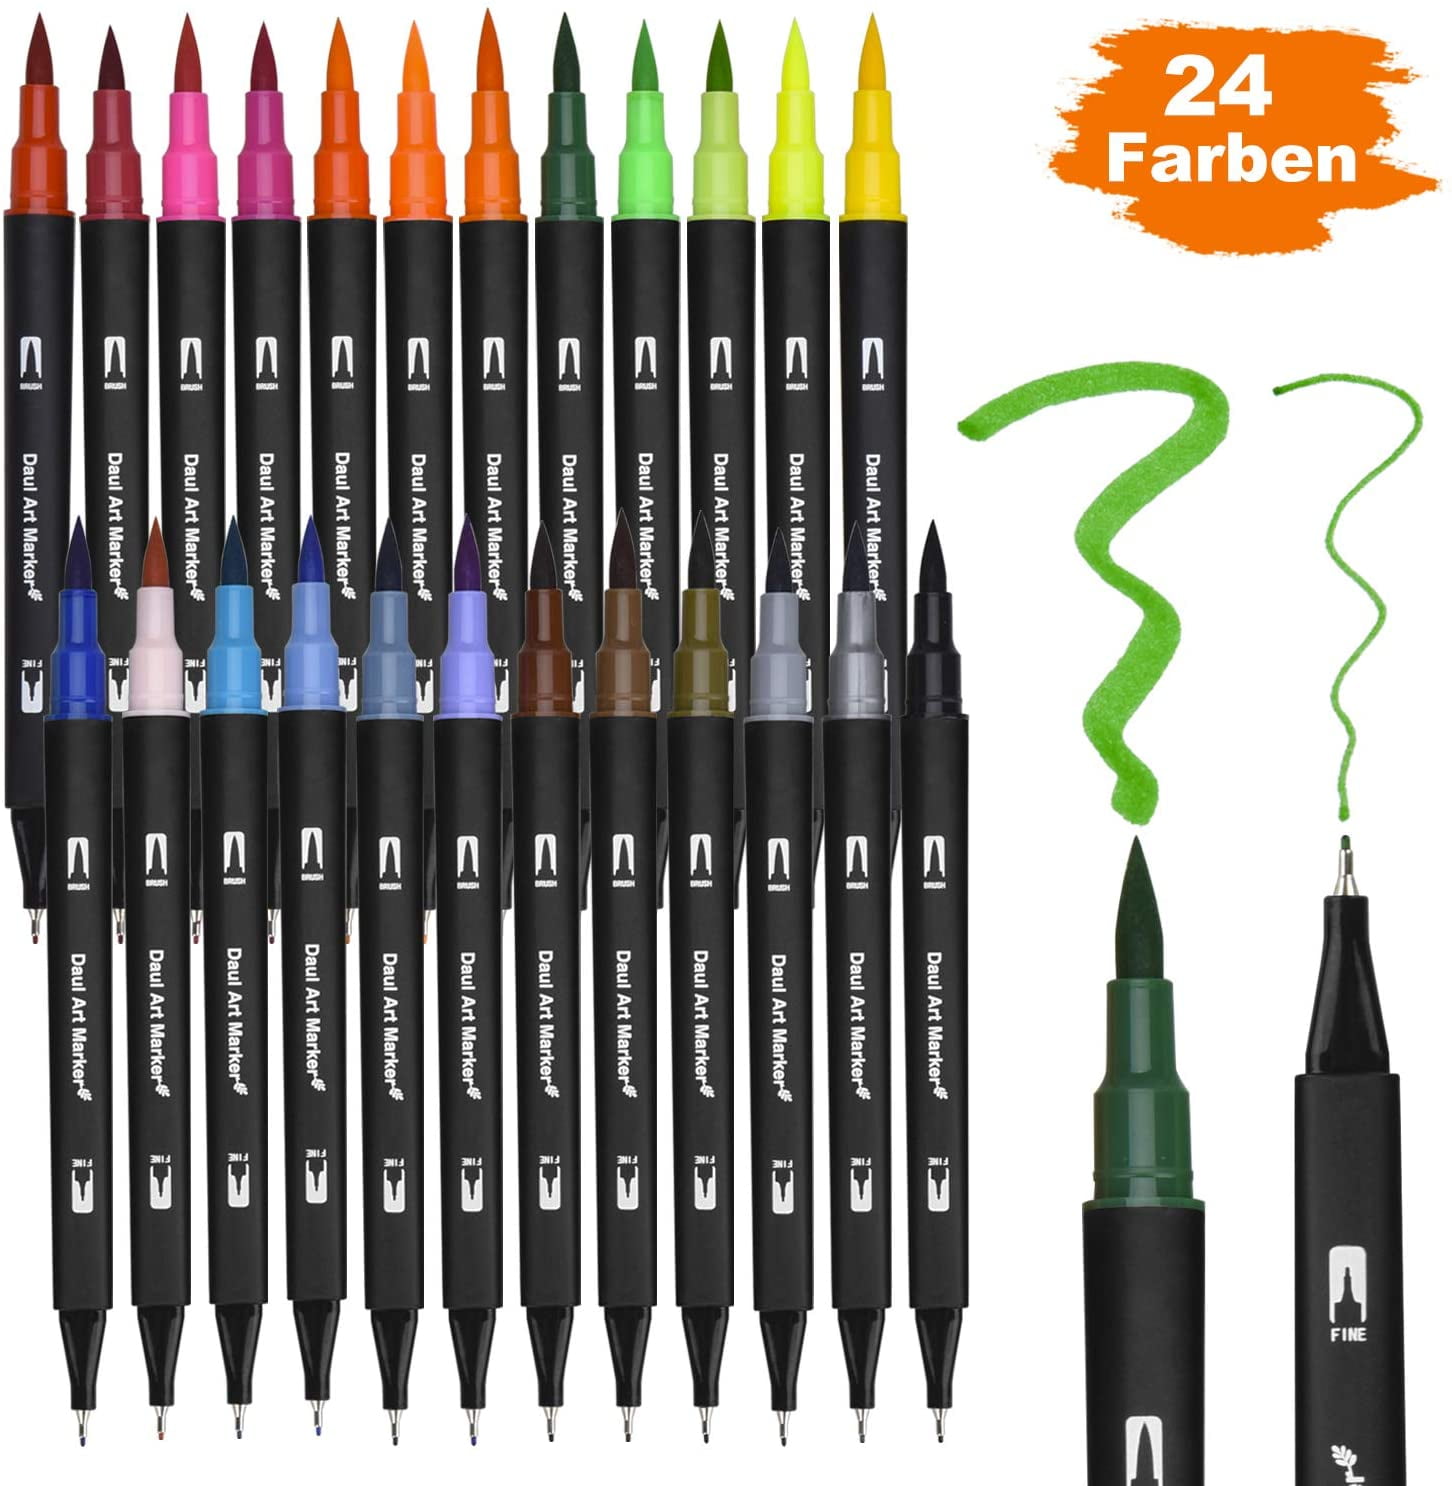 Crafts 4 All Permanent Fabric Markers, Child Safe & Non-Toxic, 24